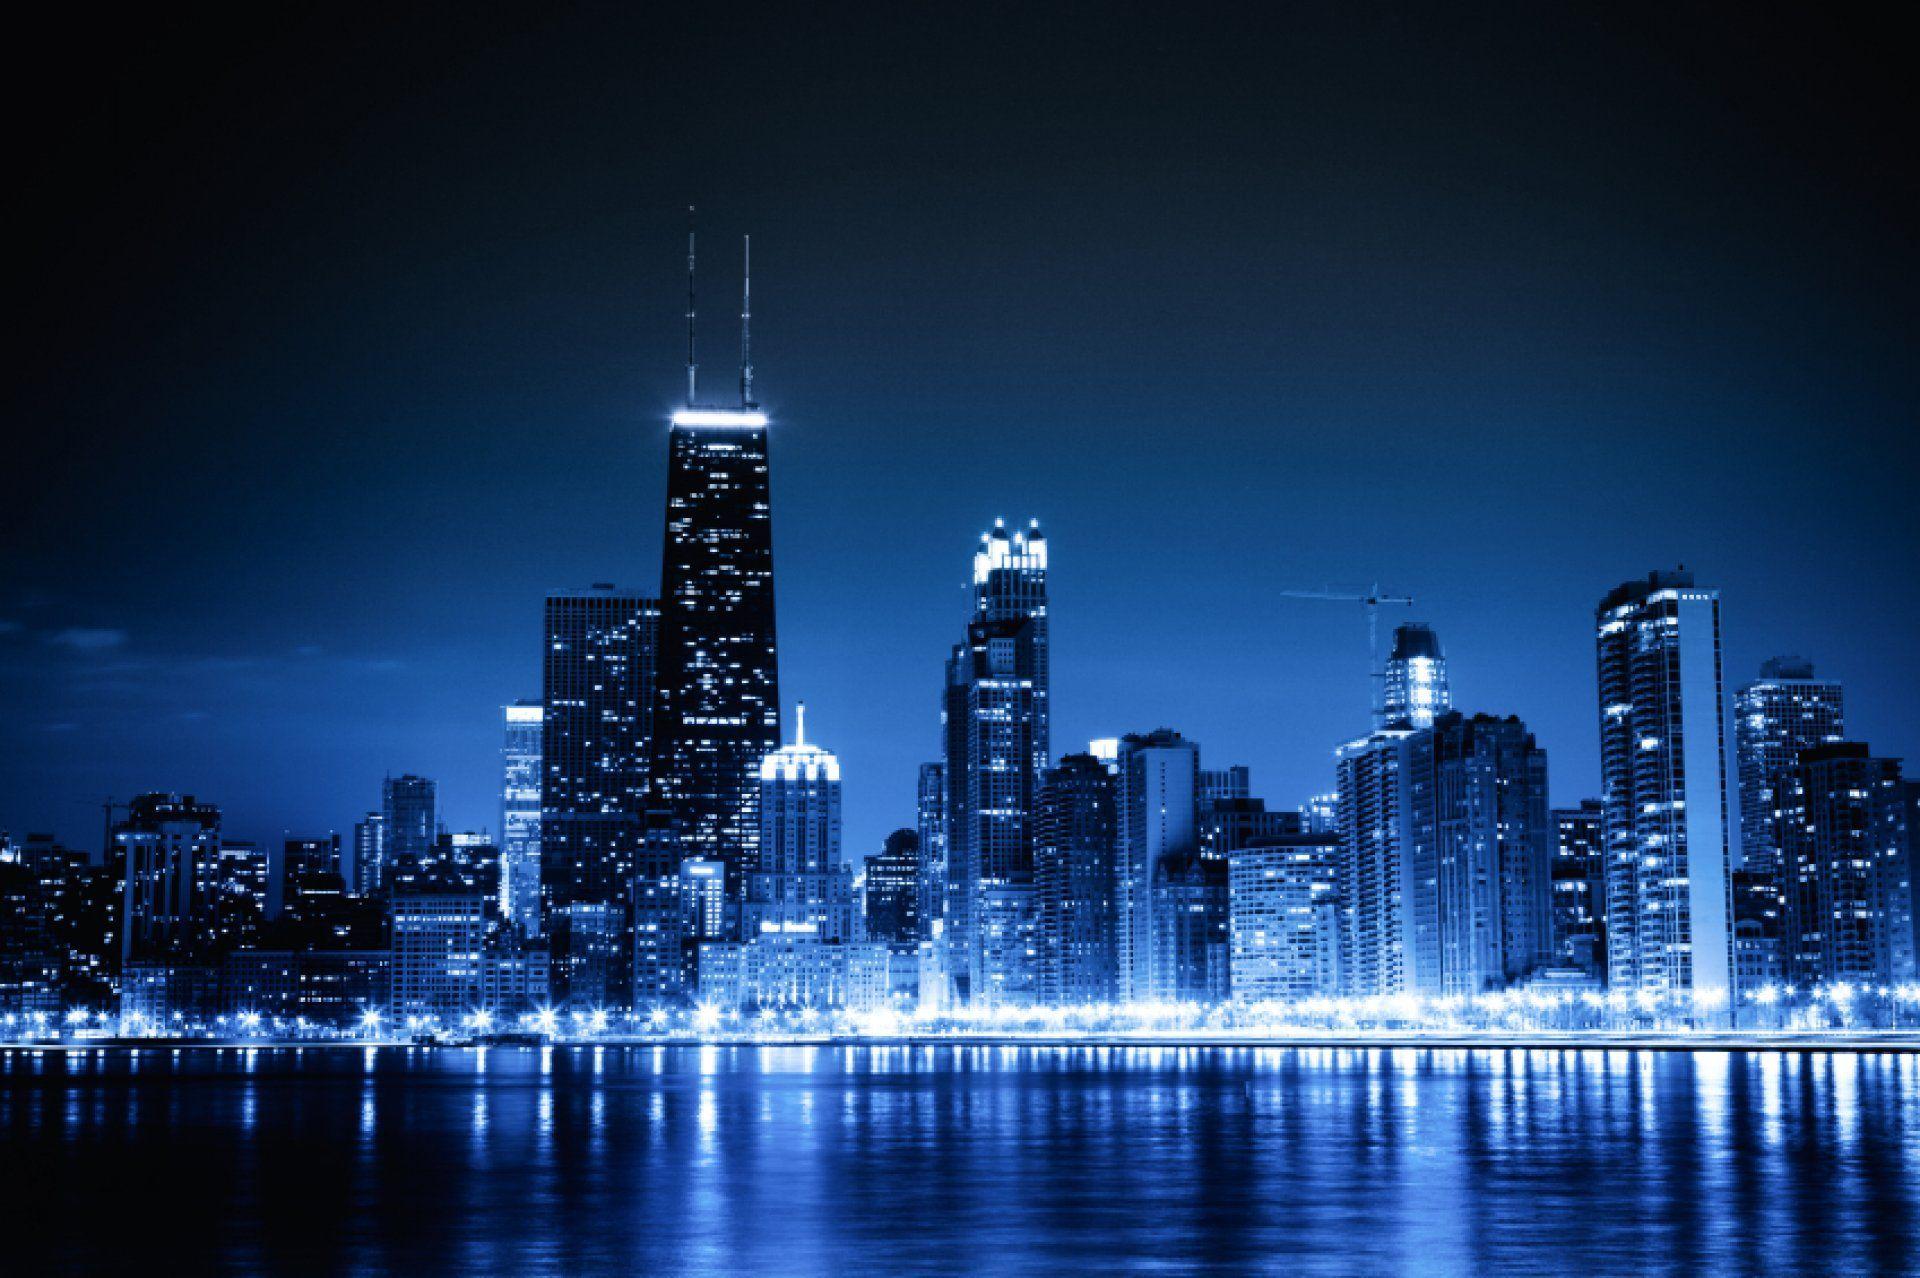 Chicago Skyline Backgrounds - Wallpaper Cave